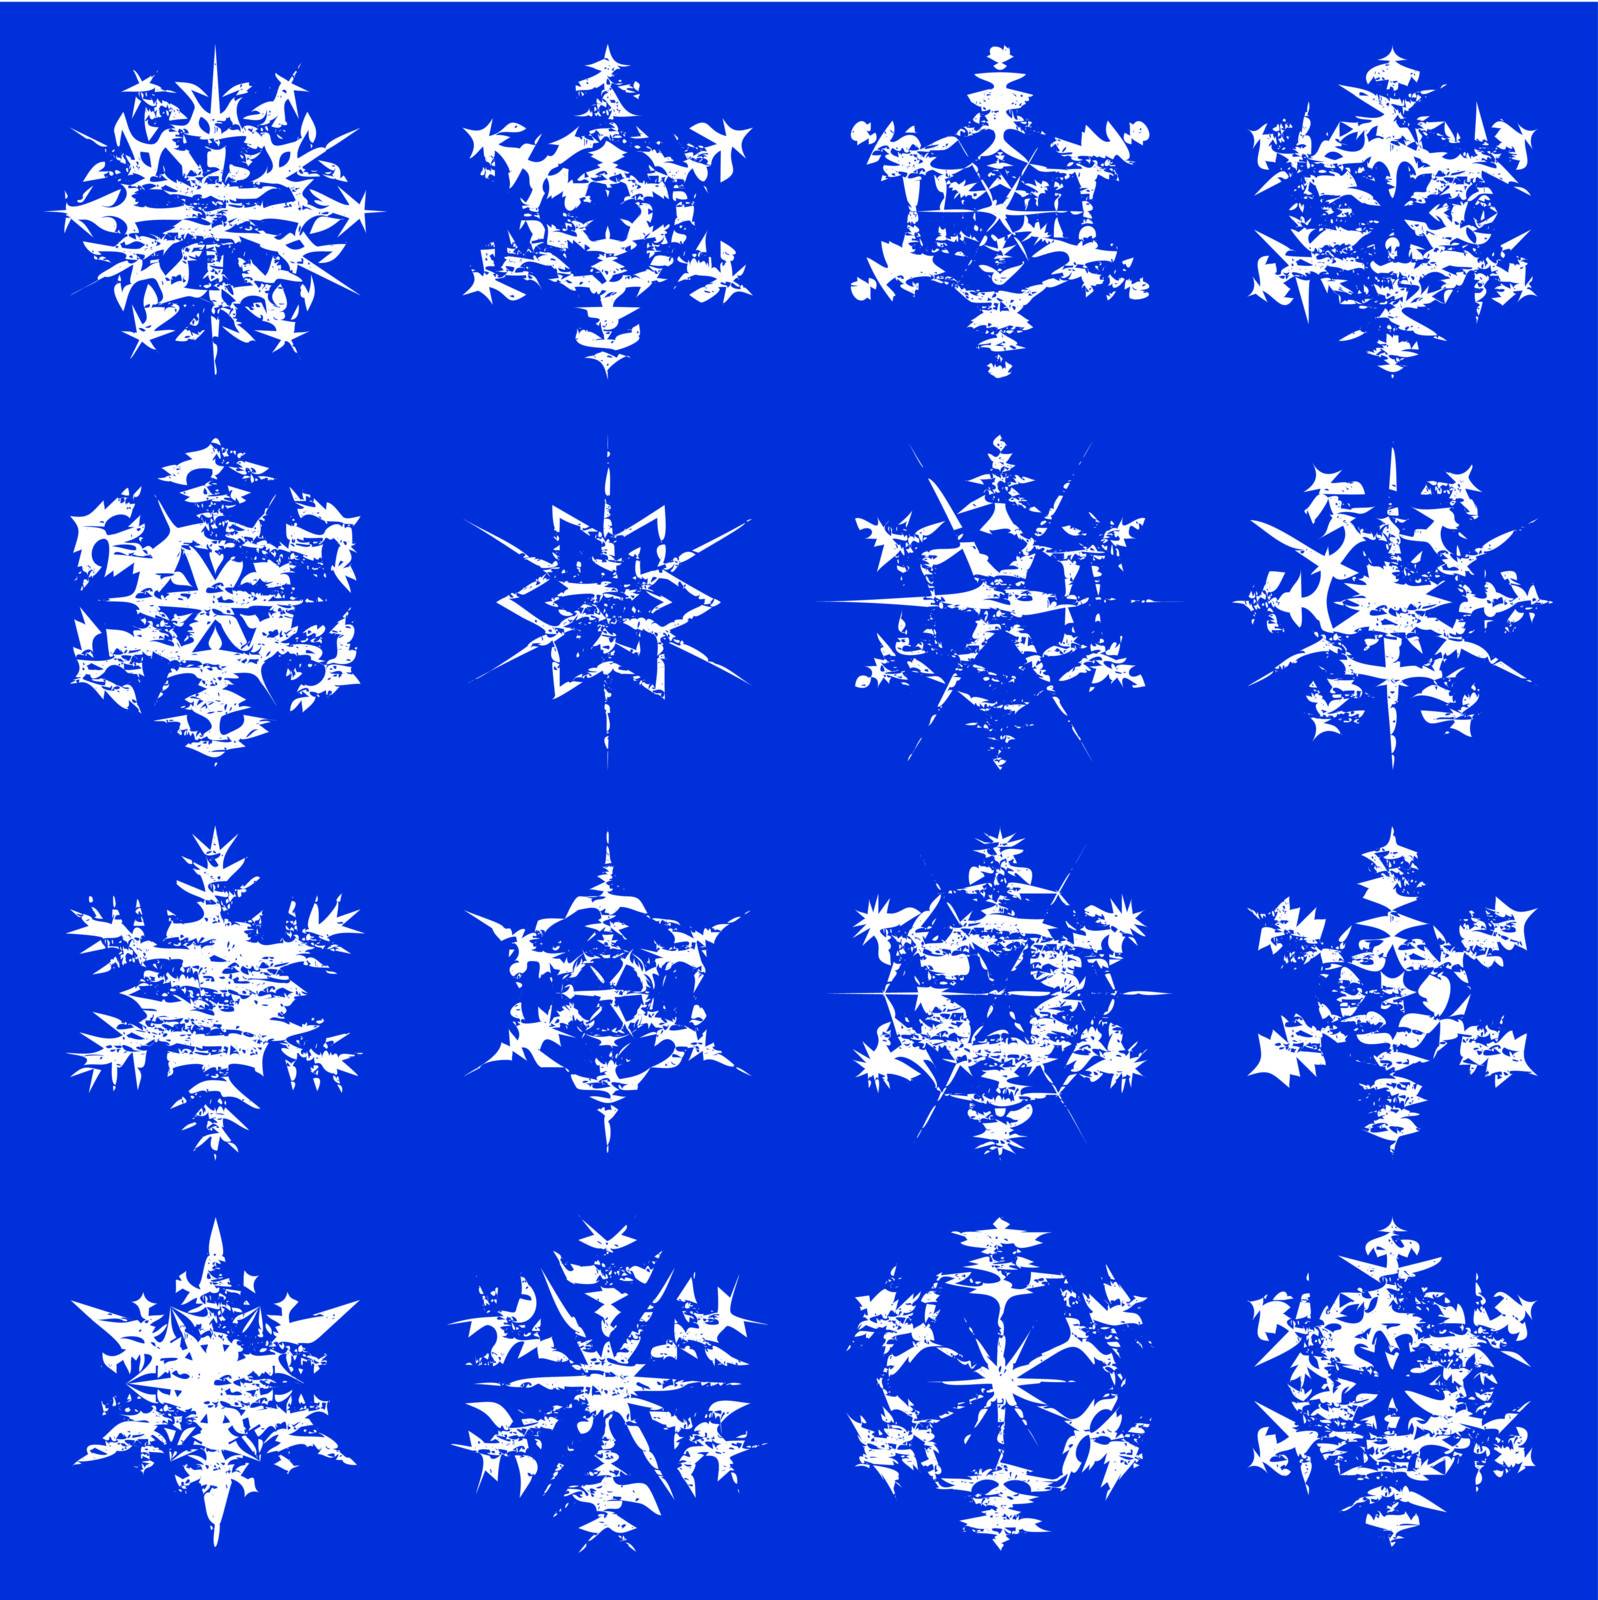 Grungy snowflake illustrations on a blue background.